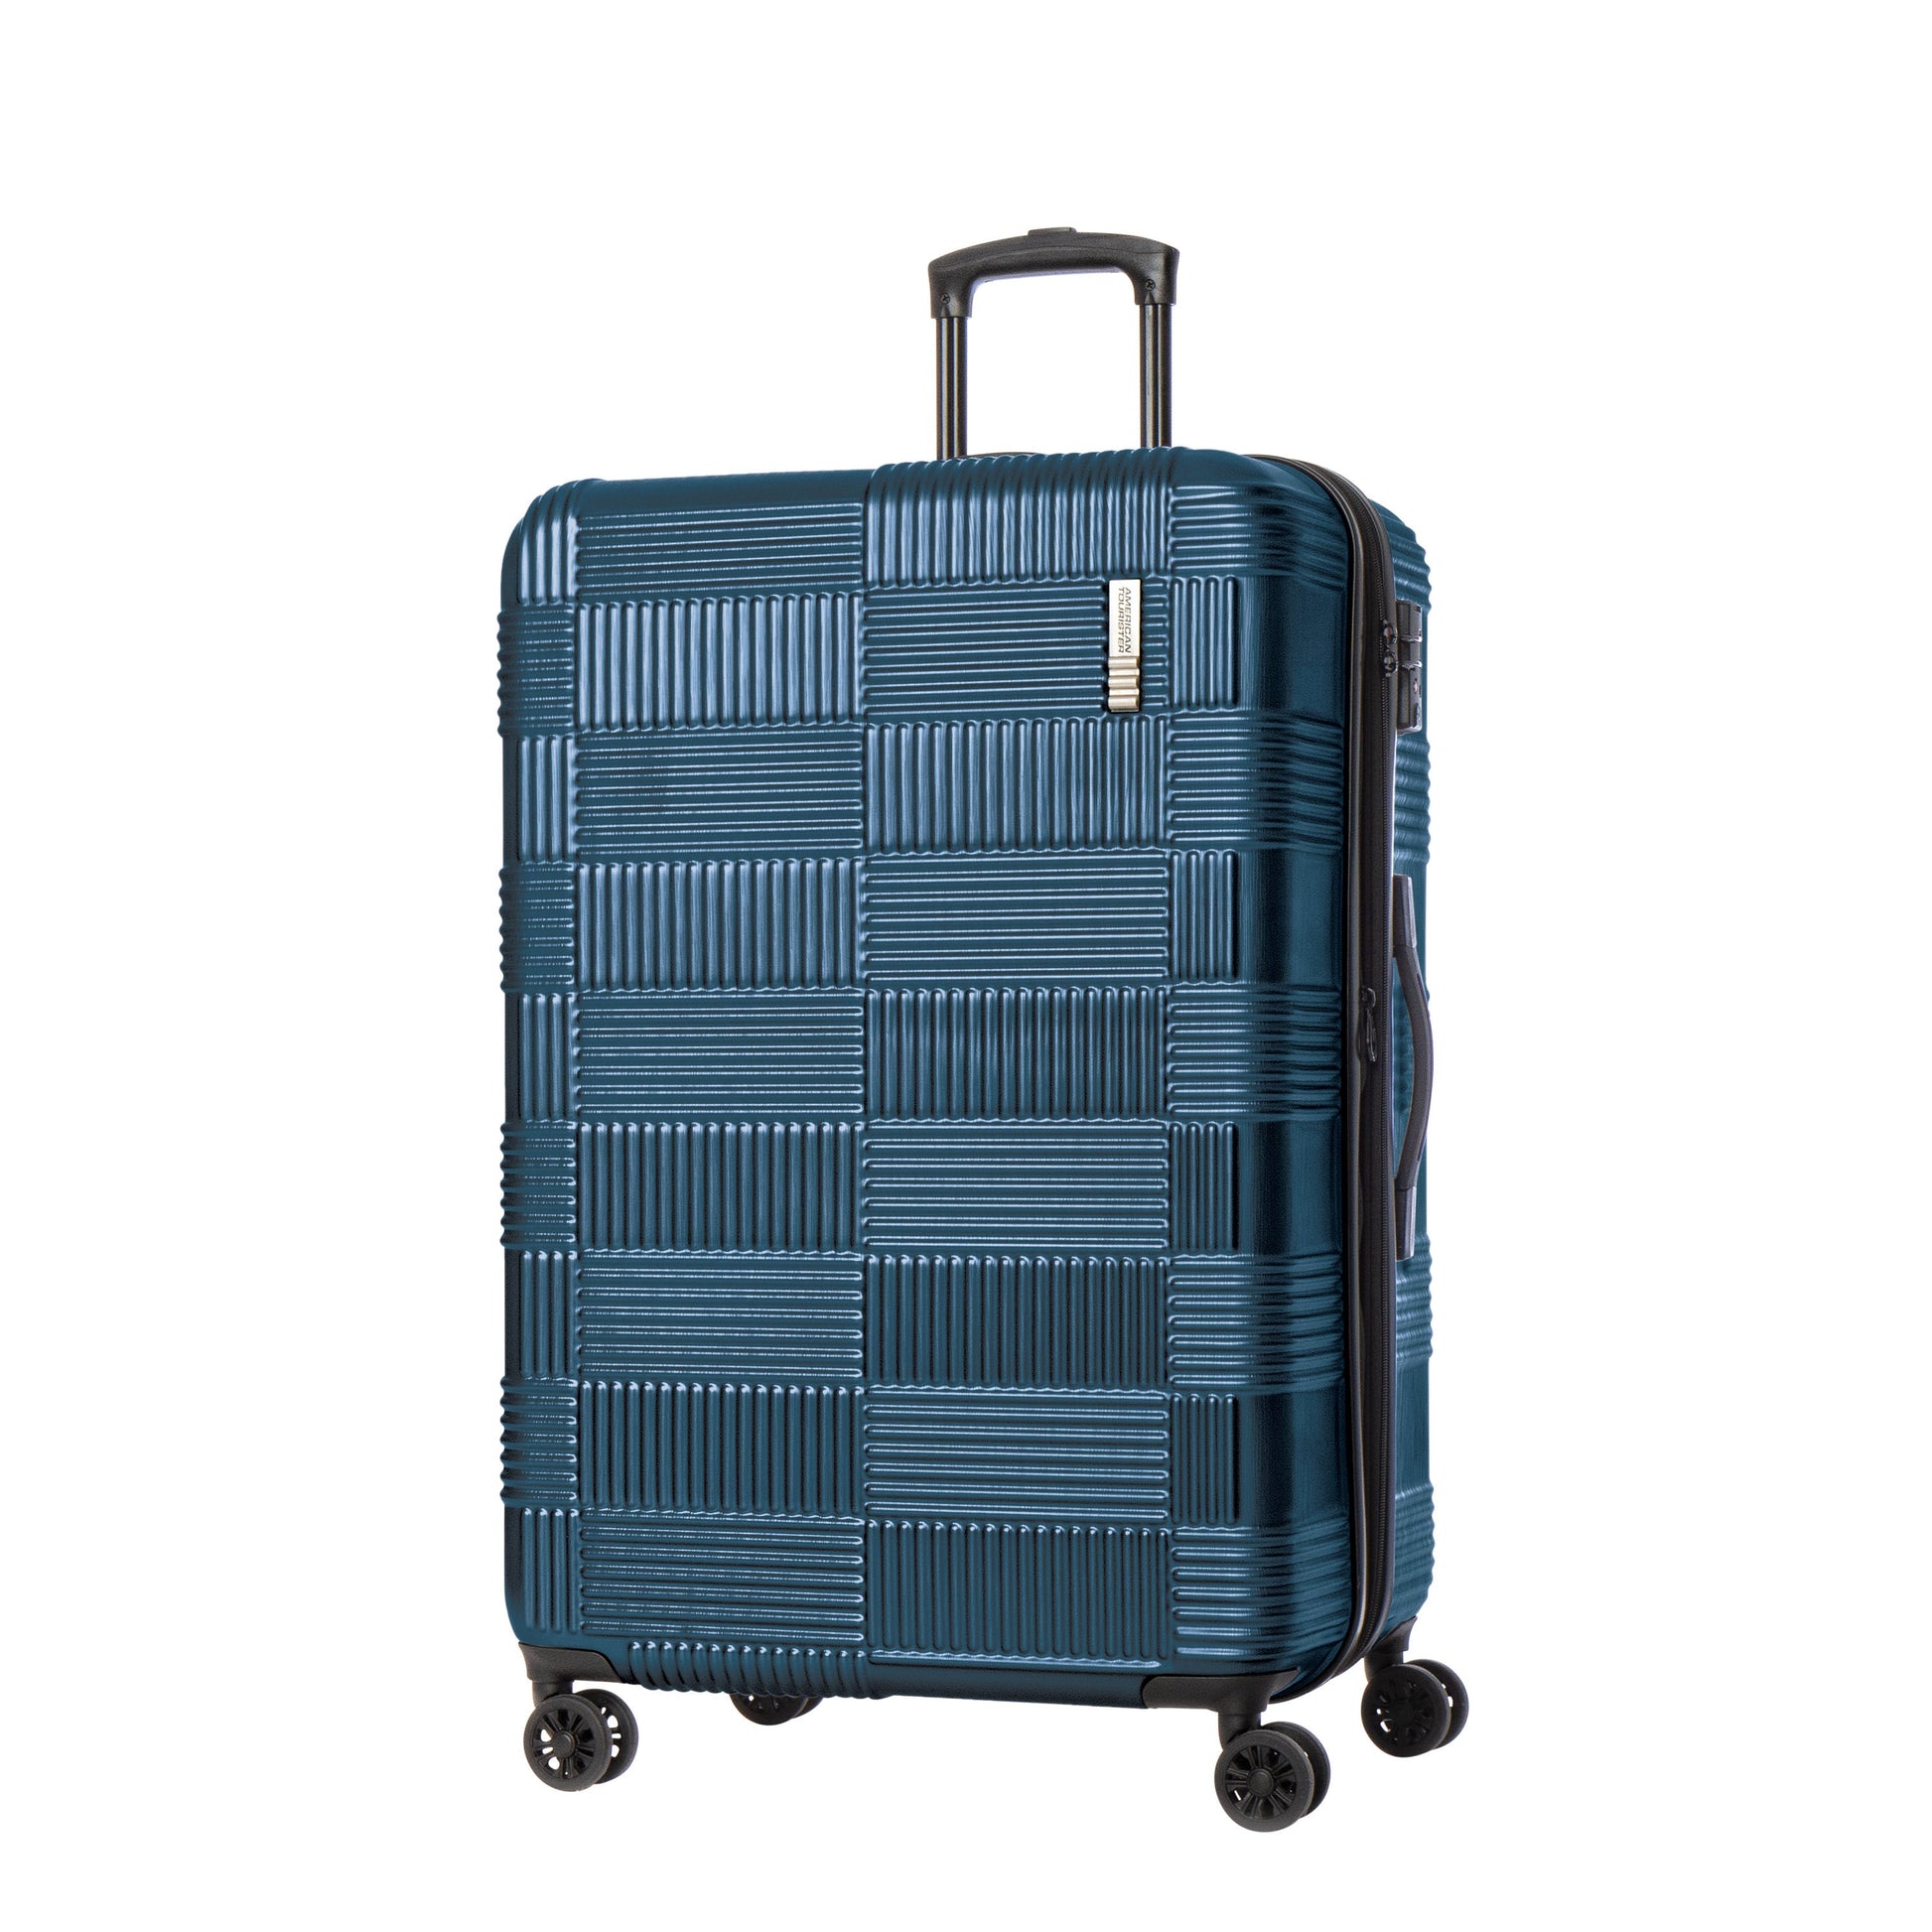 American Tourister Unify Spinner Large Expandable Luggage - Deep Teal